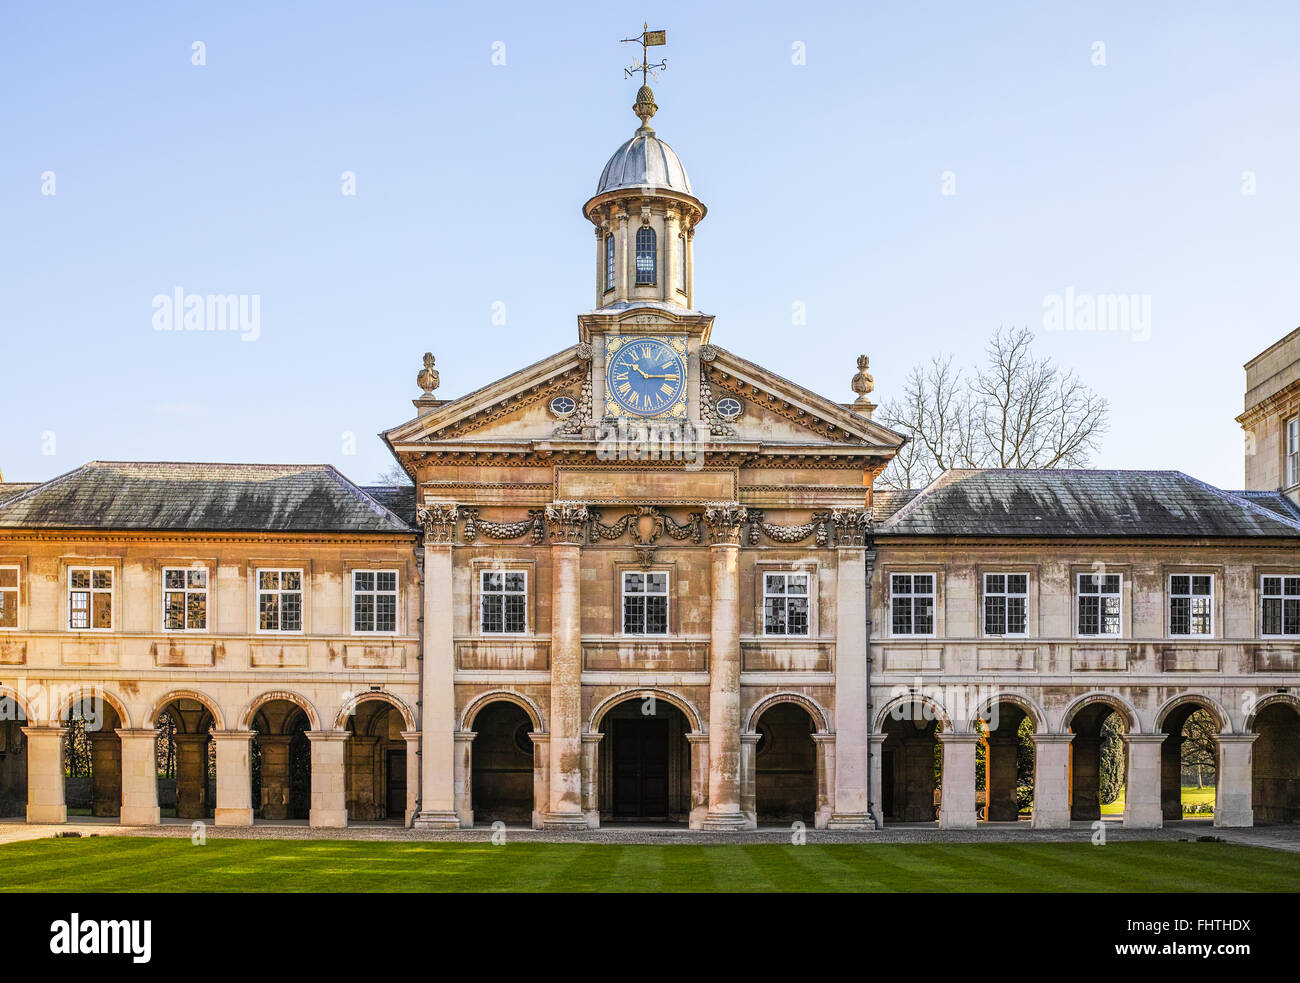 Chapel (work of Christopher Wren) at Emmanuel college, university of Cambridge, England, founded by Mildmay in the 16th century Stock Photo